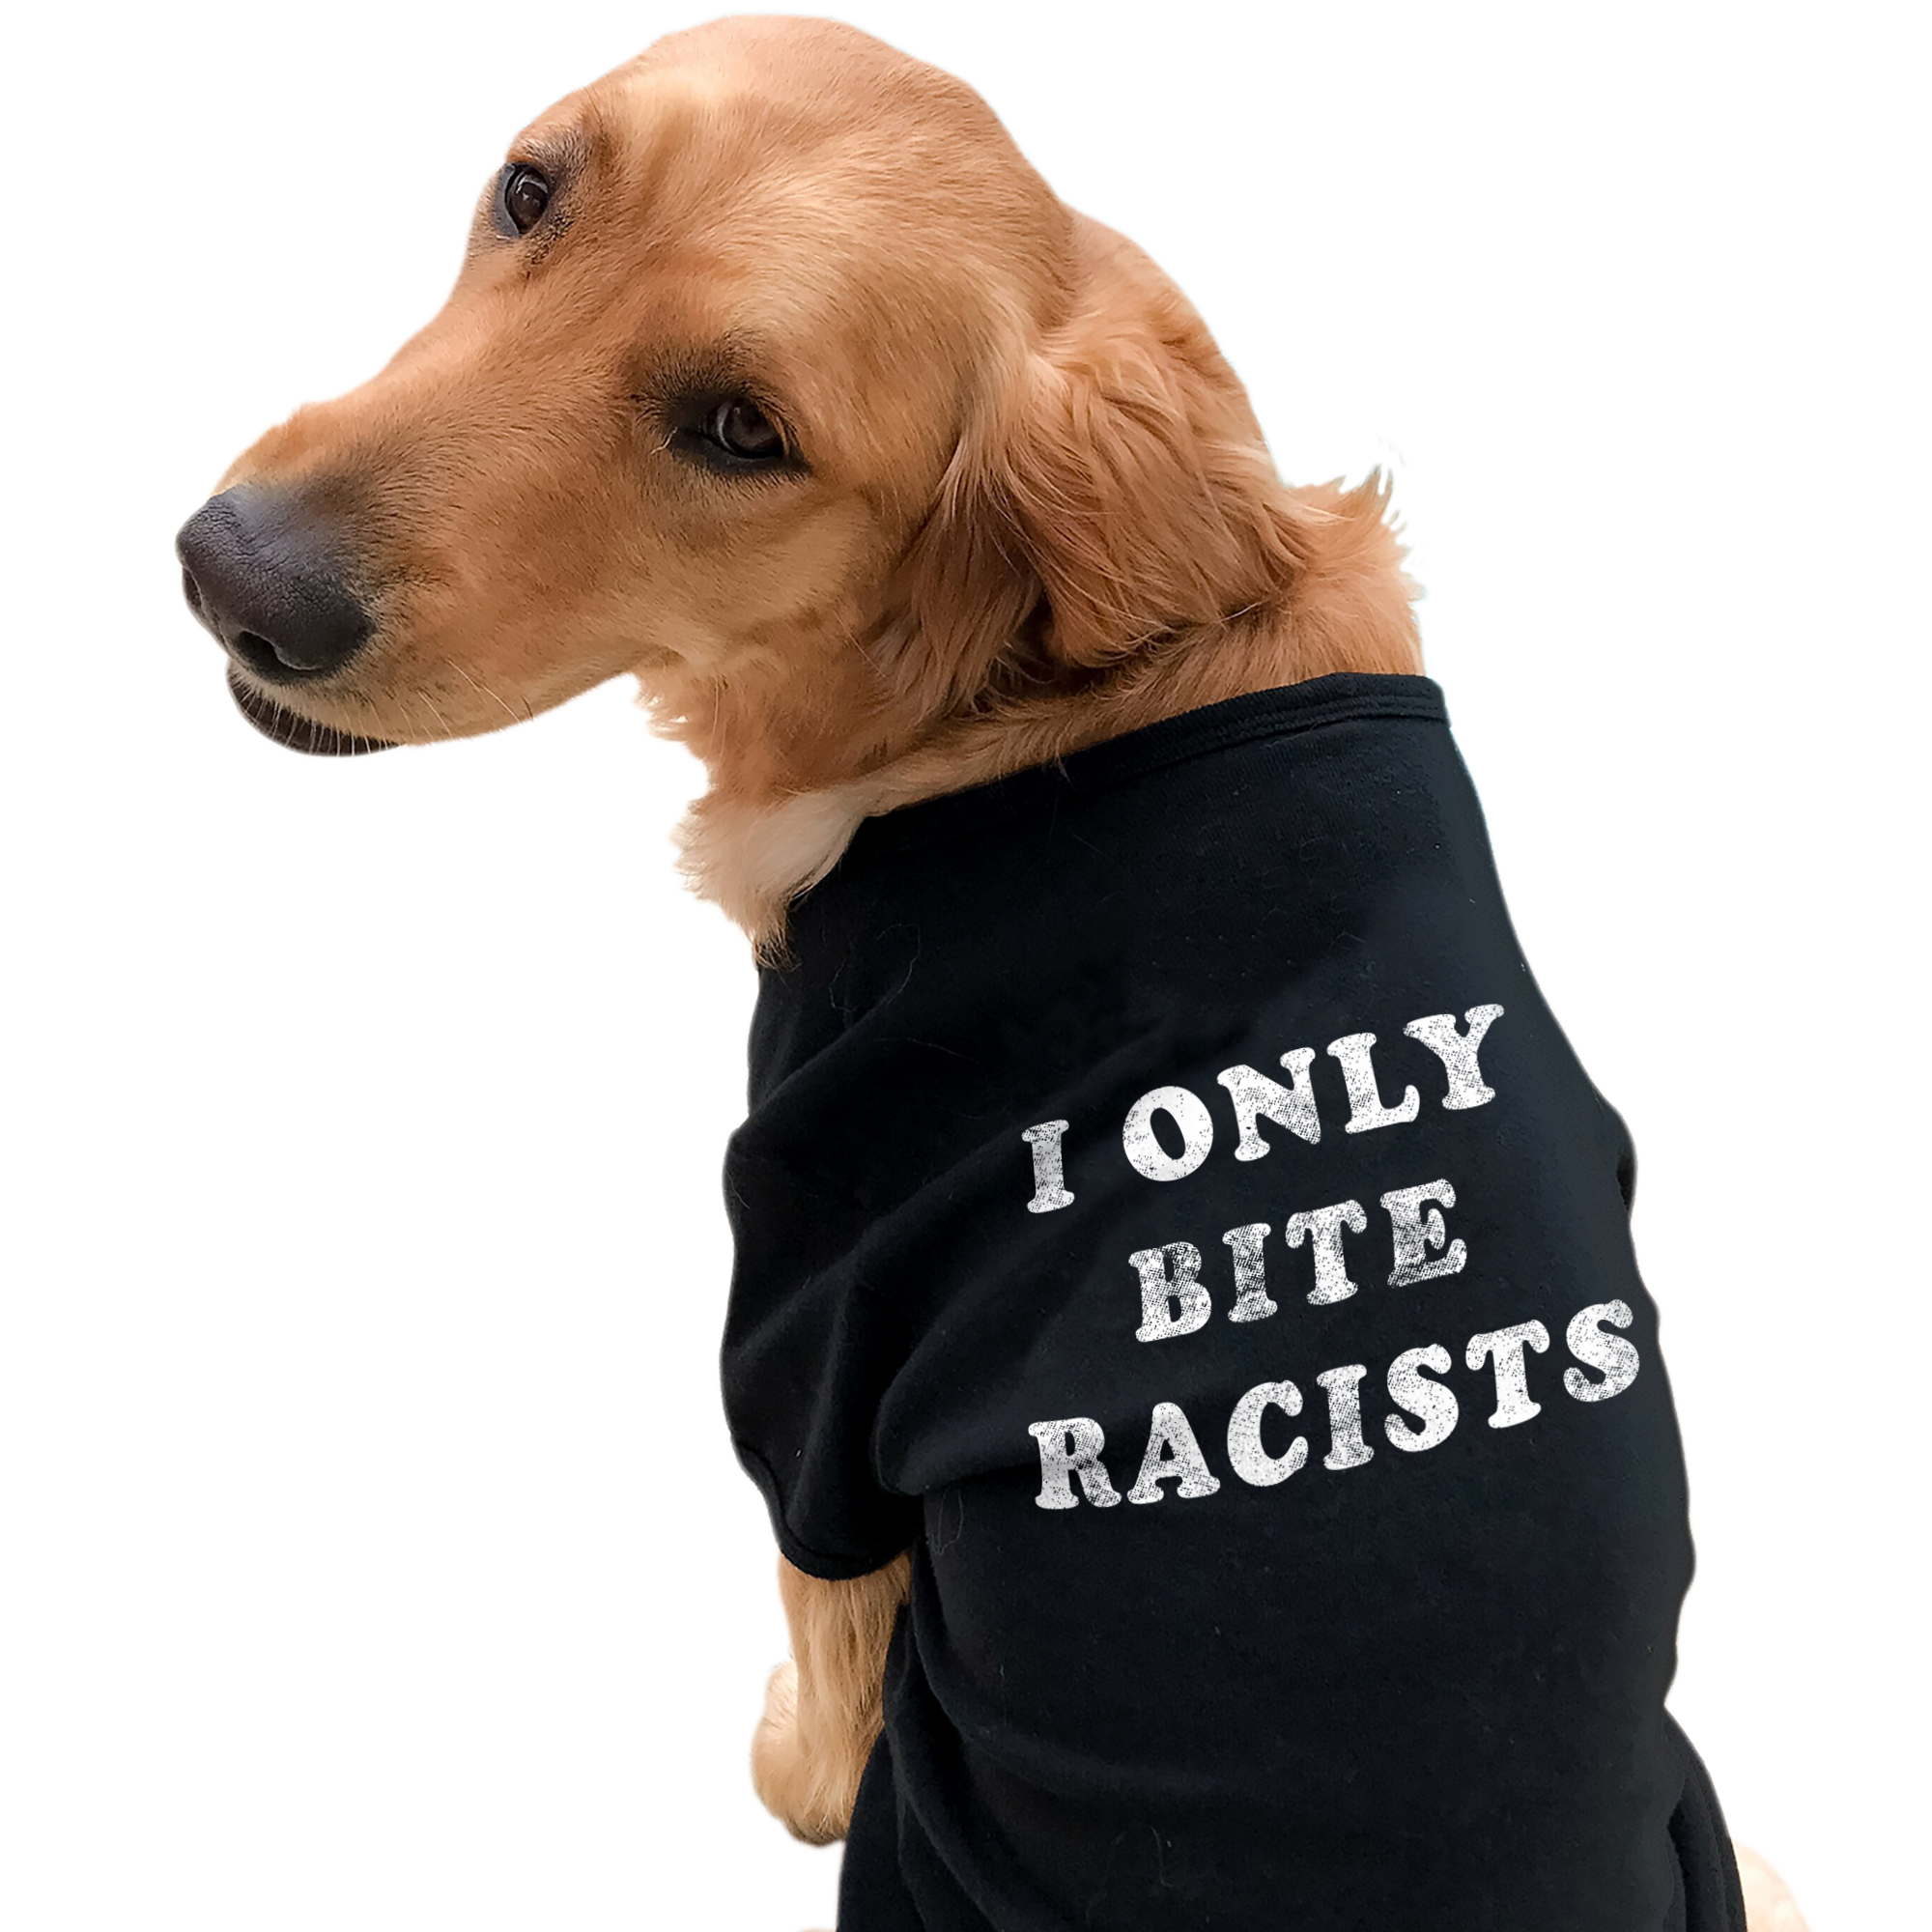 Crazy Dog Tshirts I Only Bite Racists Dog Shirt Funny Black Lives Matter BLM Protest Graphic Novelty Tee